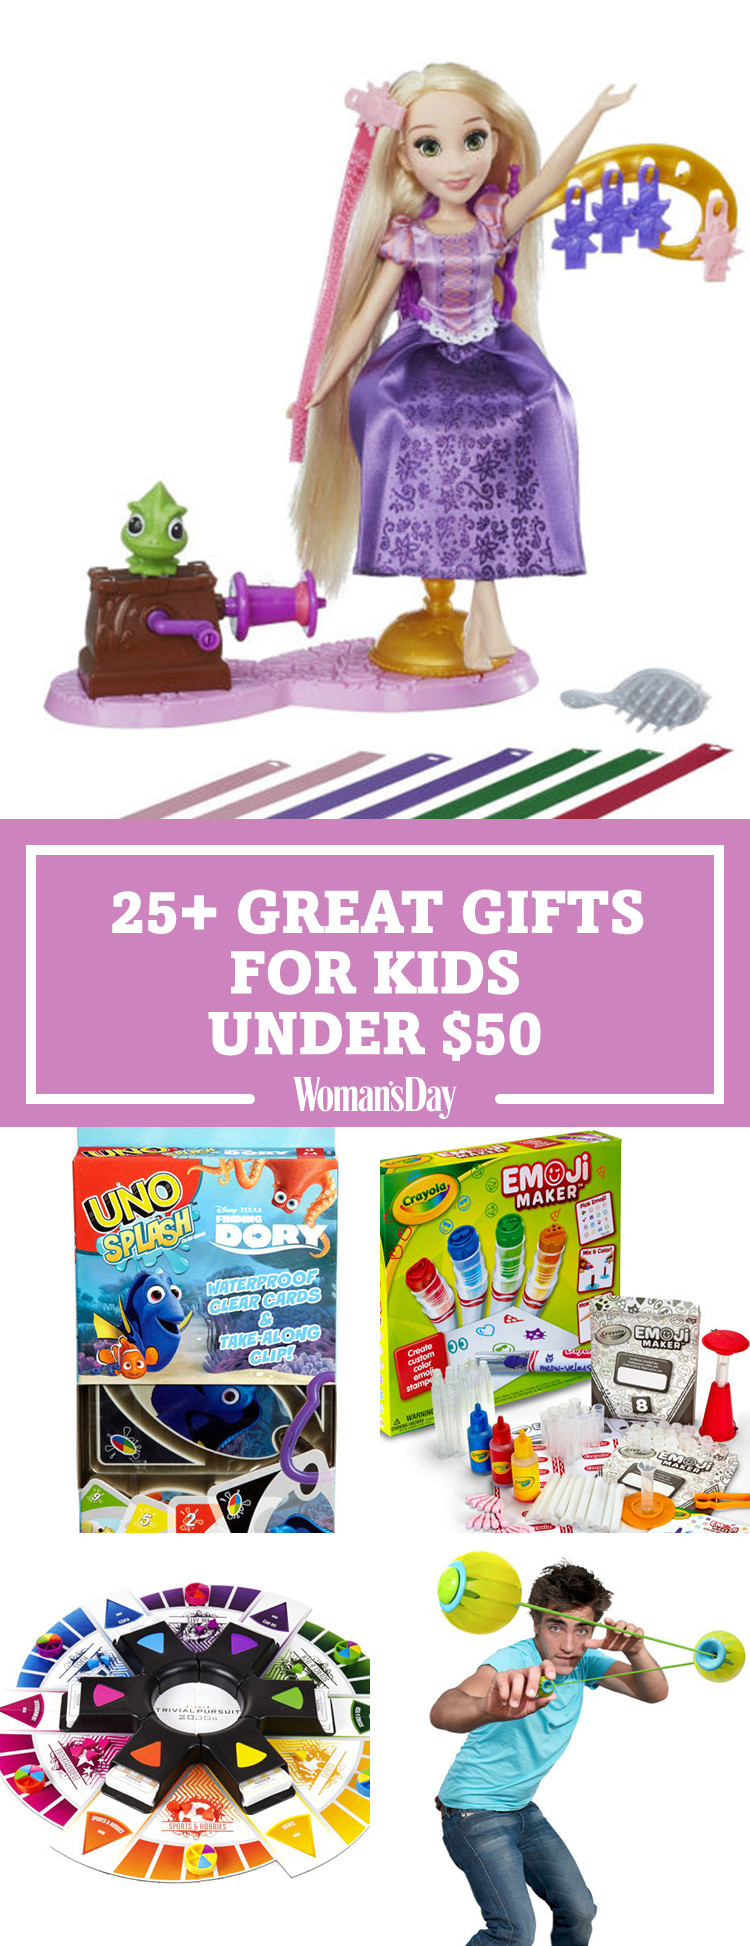 Holiday Gifts For Kids
 30 Best Christmas Gifts for Kids 2017 Holiday Gift Ideas